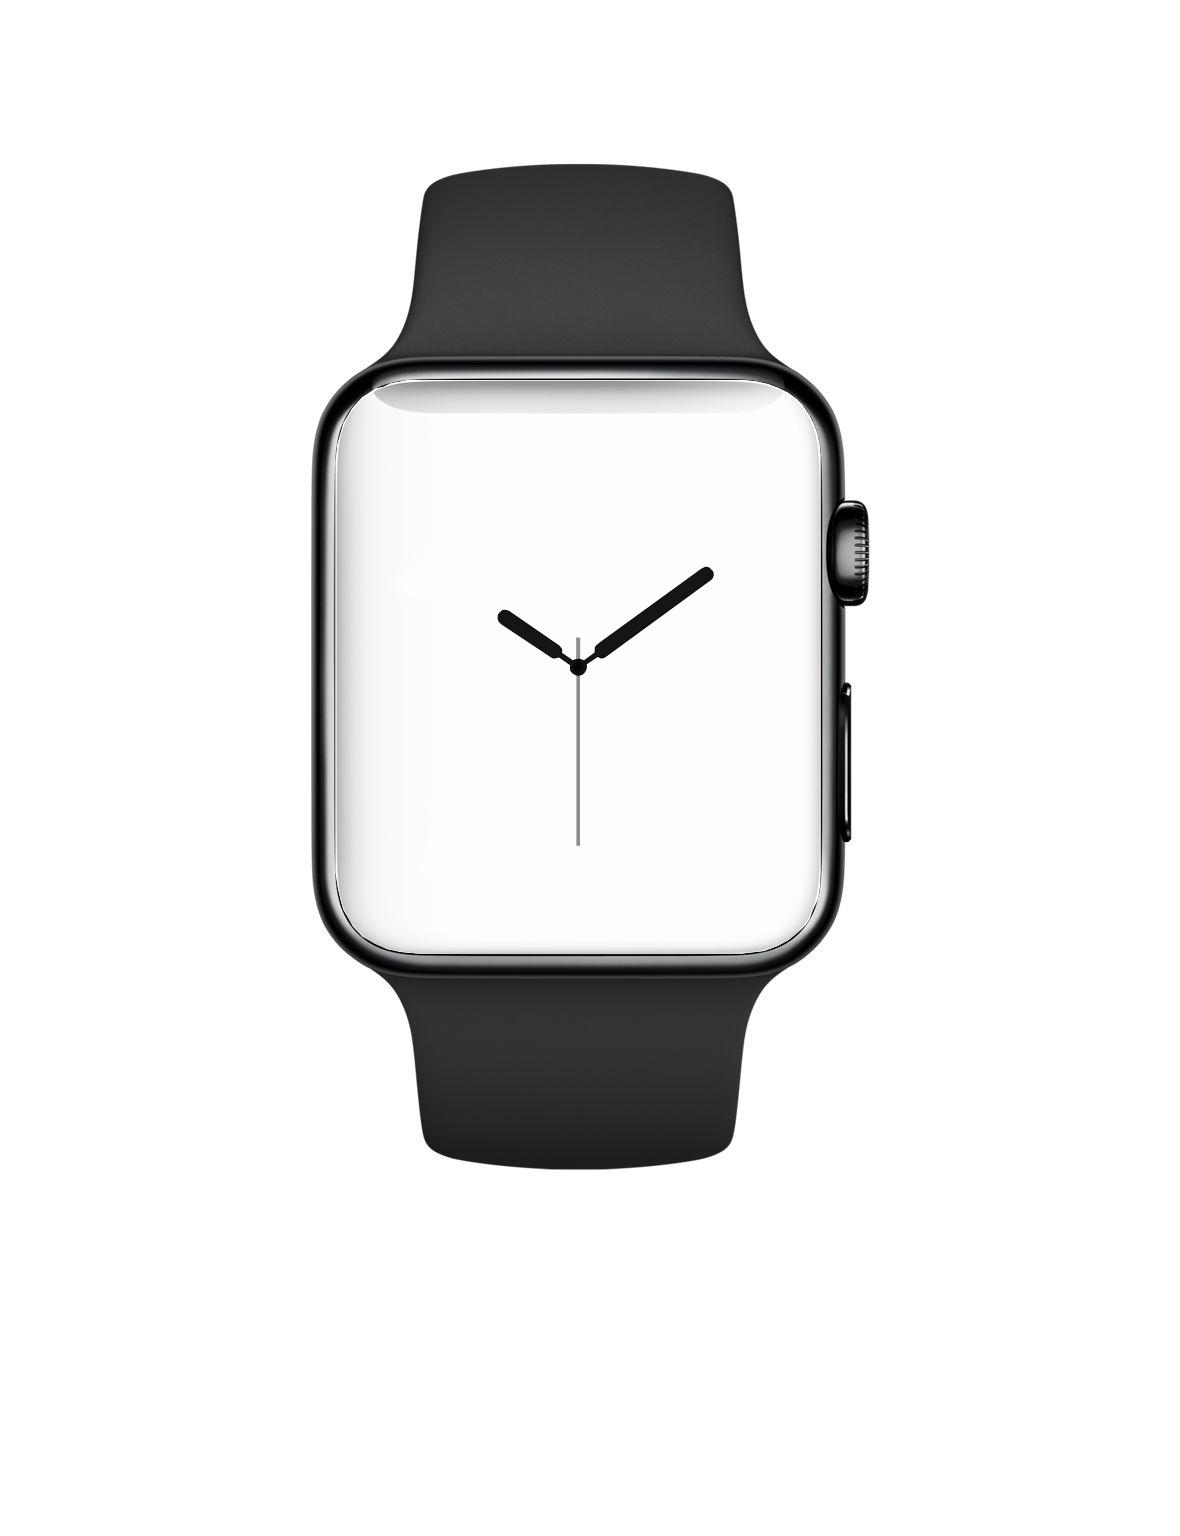 Post Custom Watch Faces For Apple Watch Merged Macrumors Forums